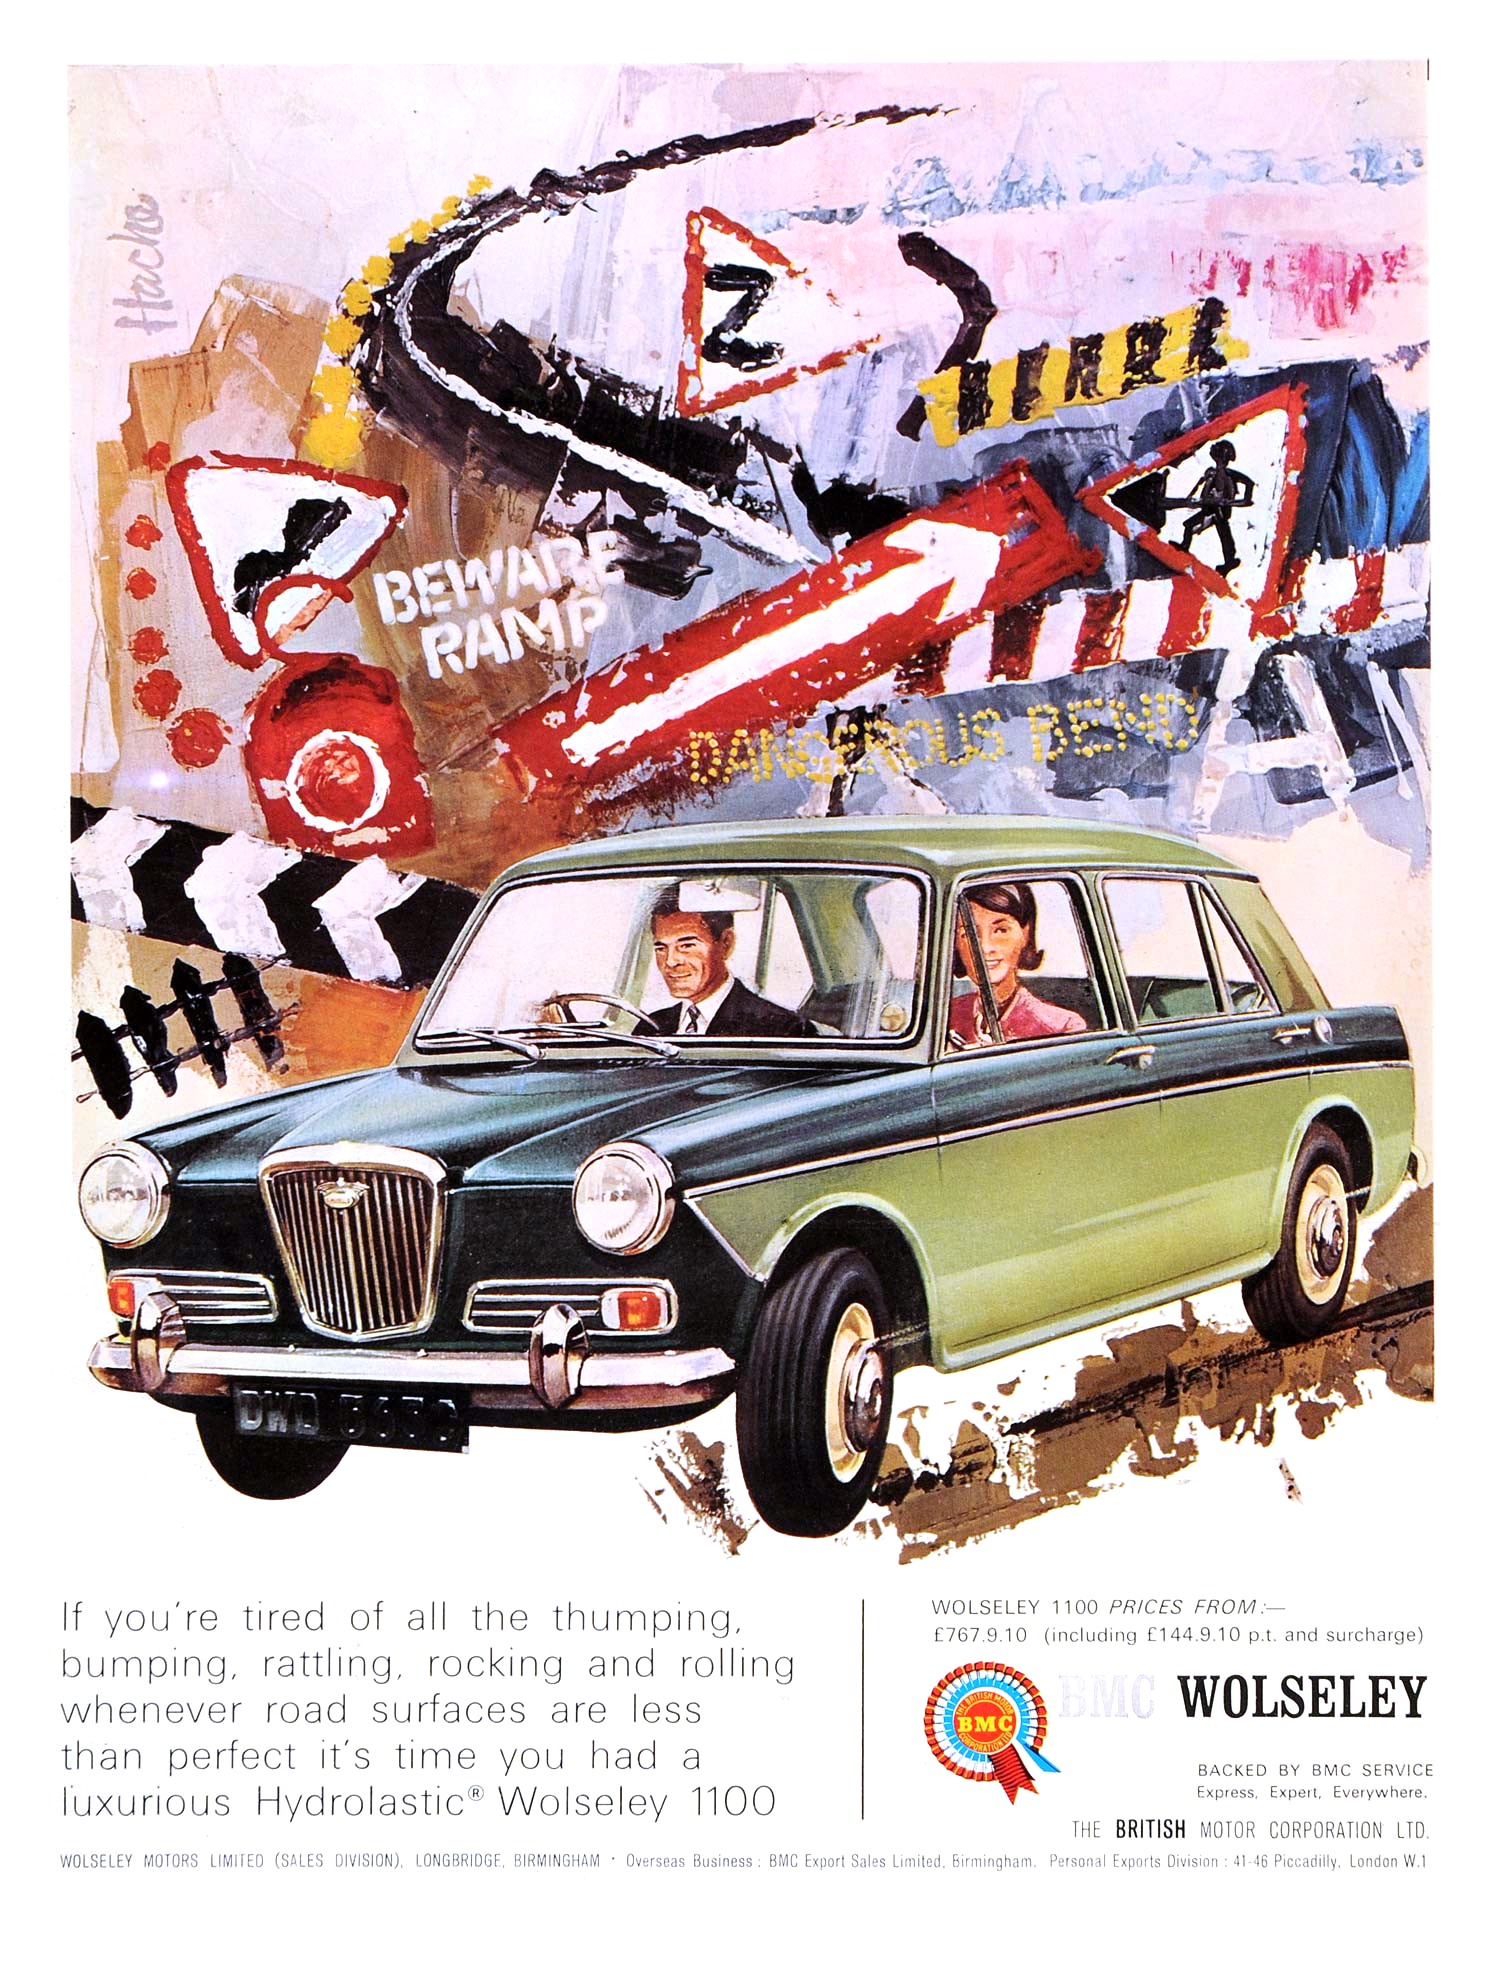 BMC Wolseley 1100 Advertising (1967): Illustrated by Hache